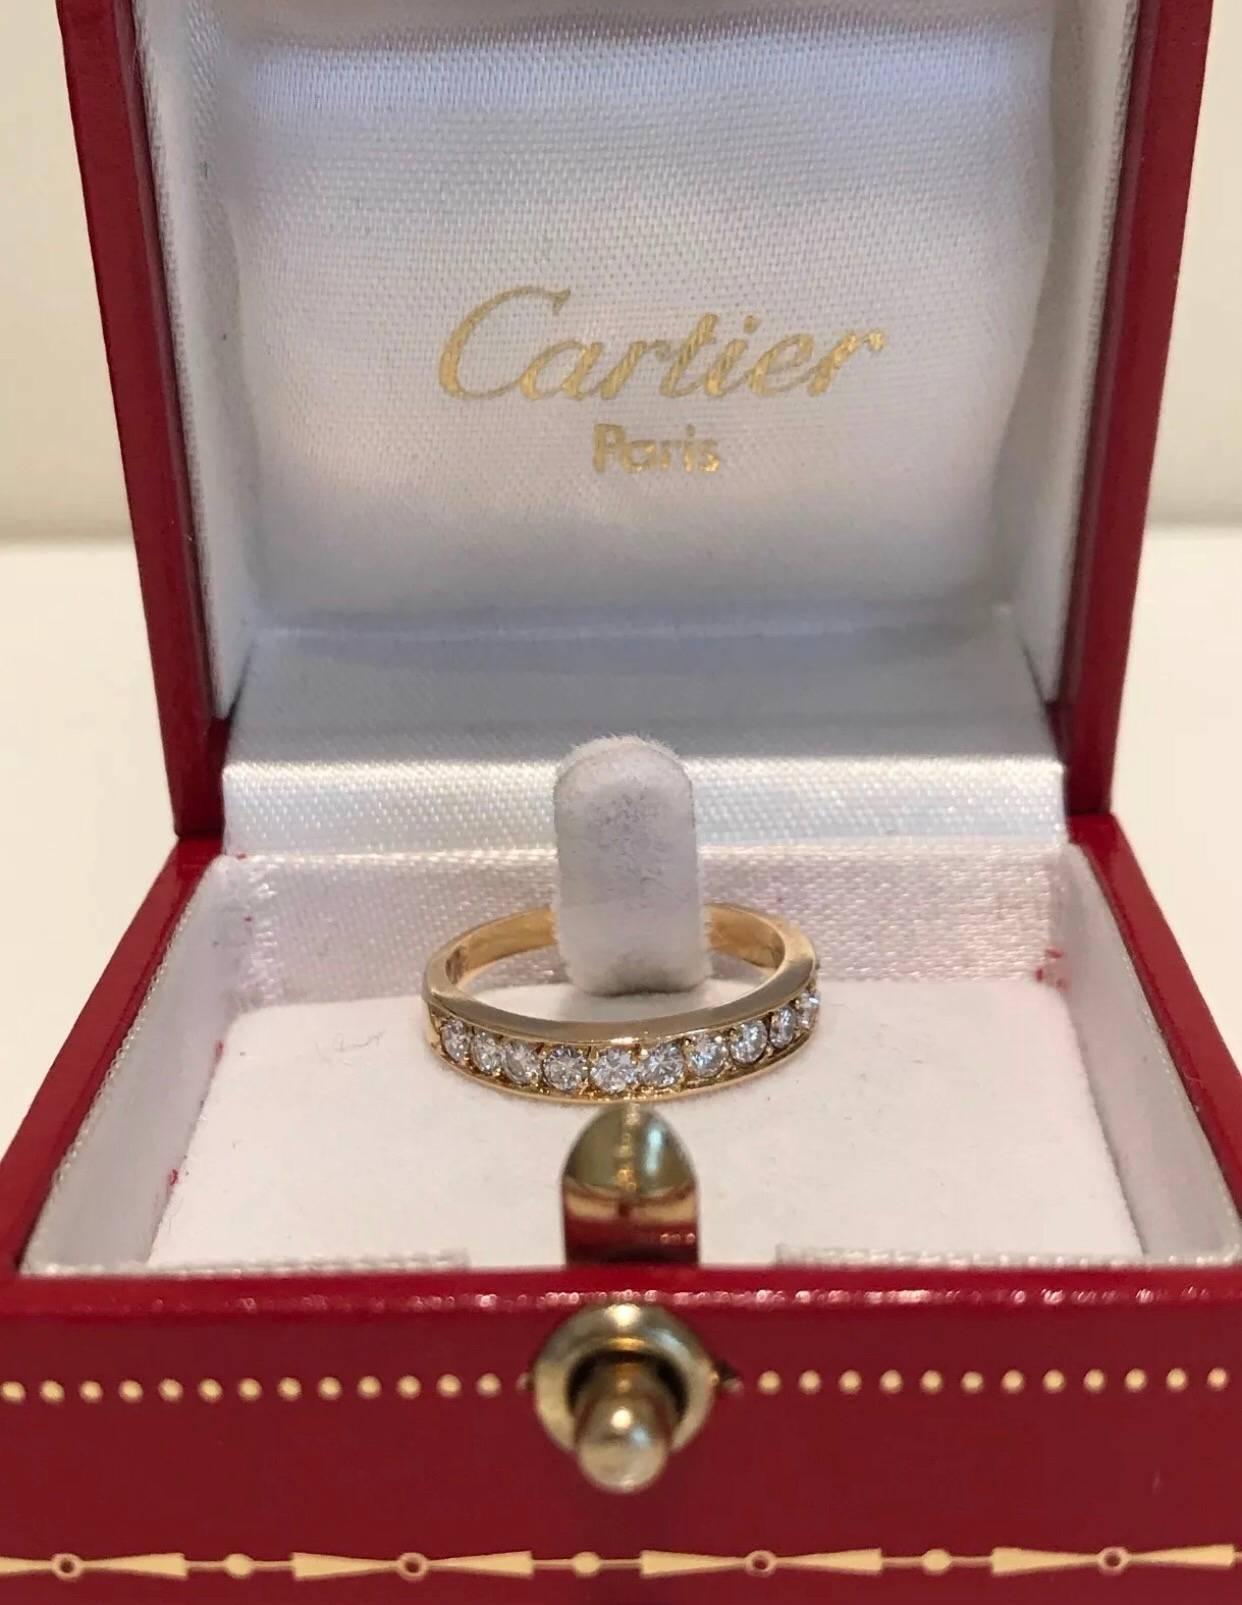 A Cartier classic wedding eternity ring set in 18k yellow gold. The ring features twelve brilliant cut round diamonds of approx 0.50 carat weight. Fully hallmarked Cartier 750 52-941956
Diamond weight: approx 0.50 carat
Weight: 1.9 grams 
Size: UK M